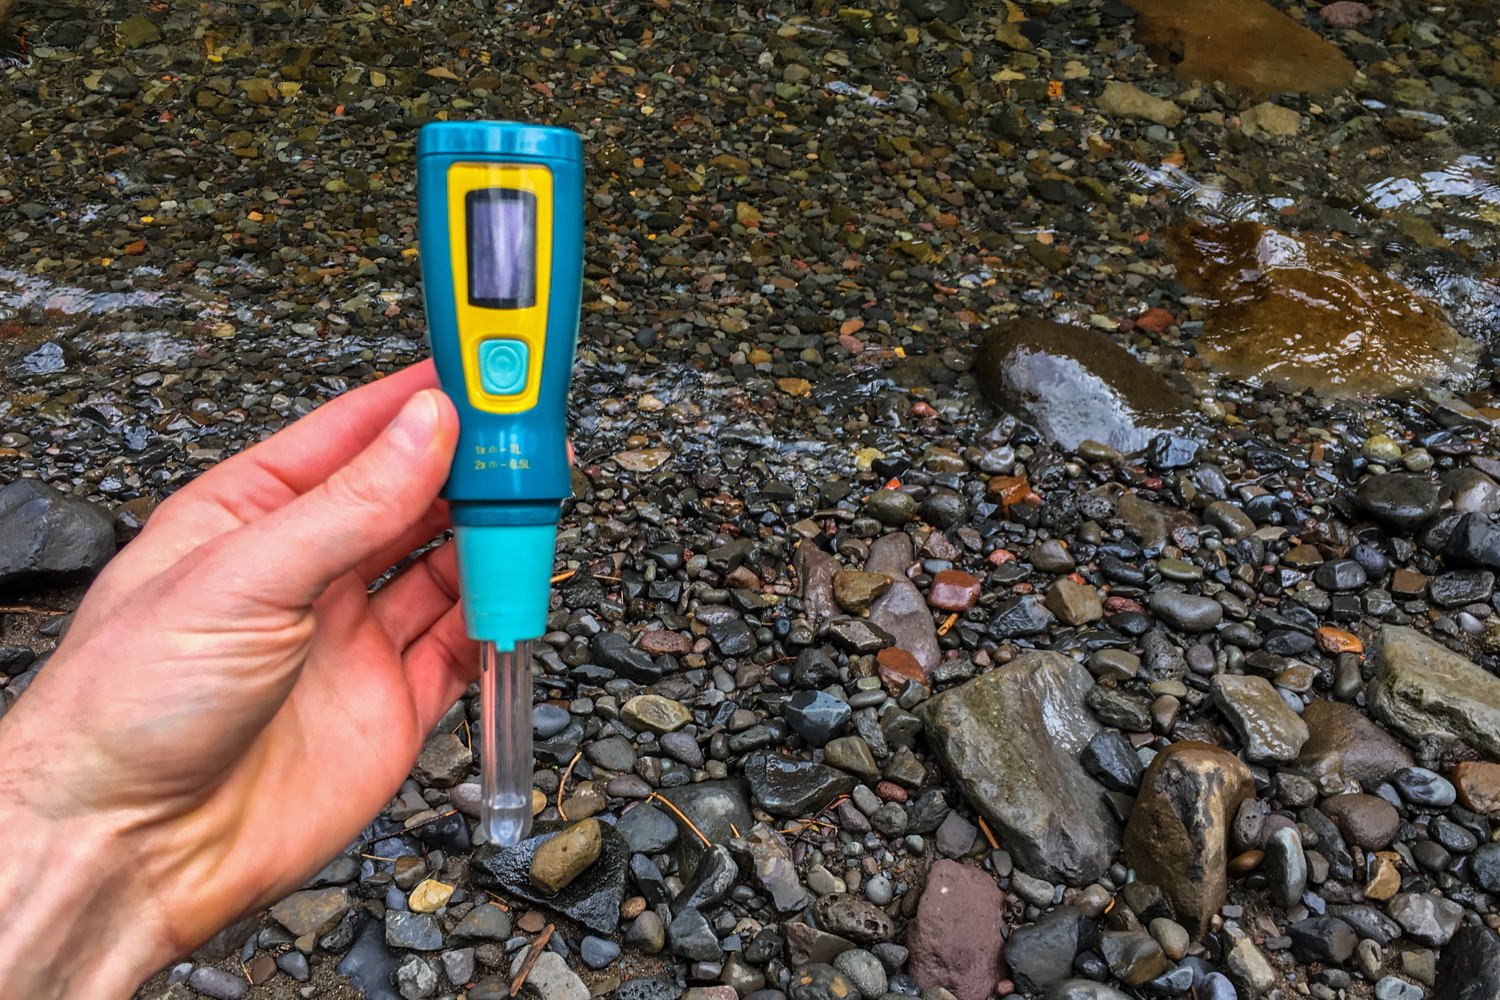 Closeup of the SteriPEN Ultra water purifier in front of a rocky creekbed